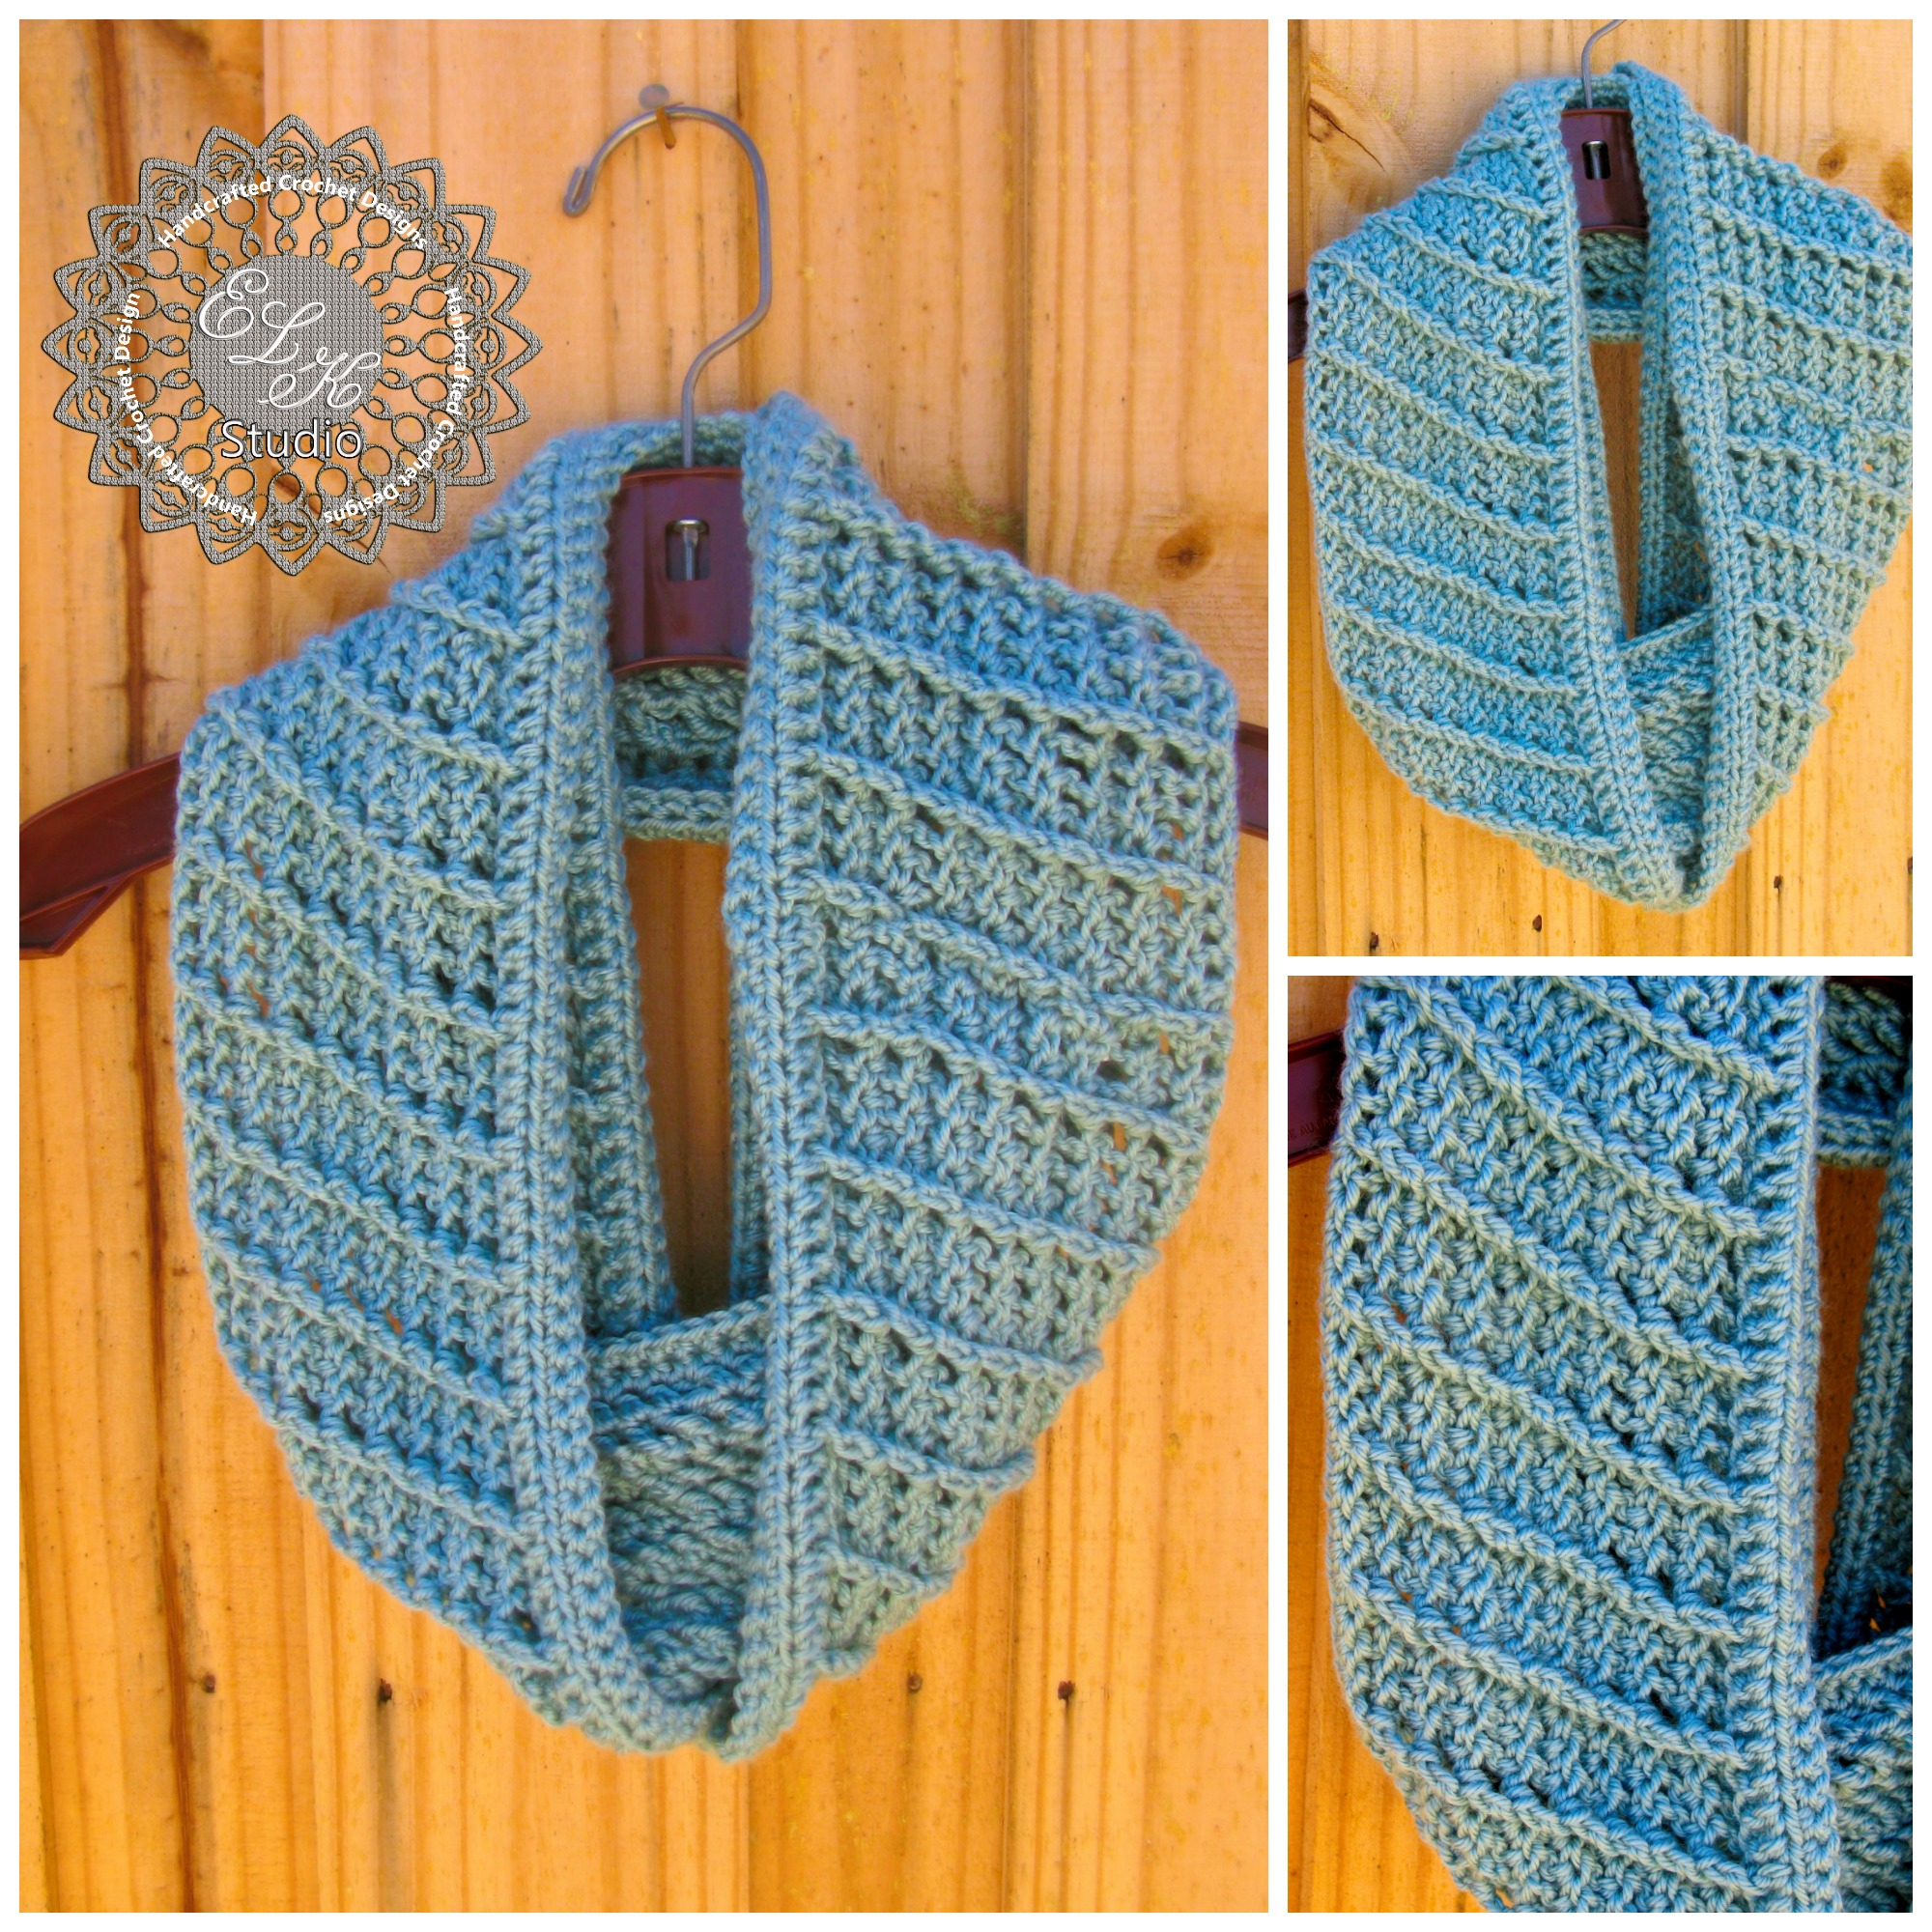 Free Crochet Infinity Scarf Pattern Country Appeal A Free Crochet Infinity Scarf Pattern Elk Studio